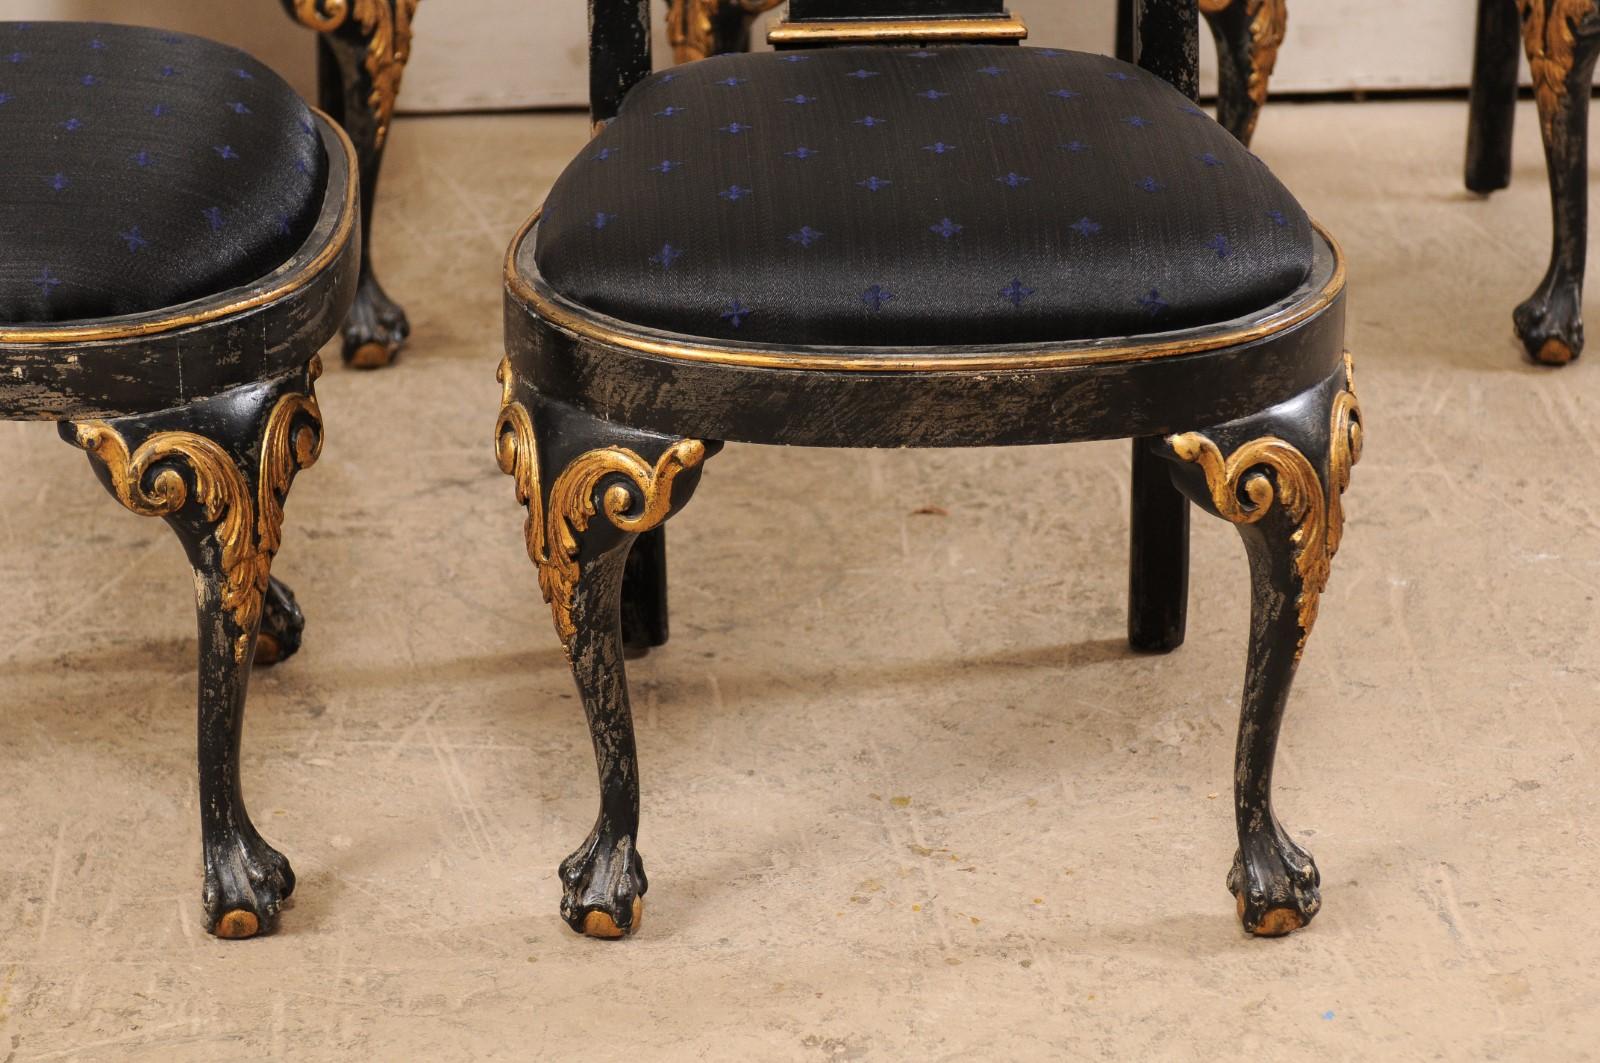 20th Century Set of 6 Portuguese-Style Pierced Splat Back Dining Side Chairs, Black & Gold